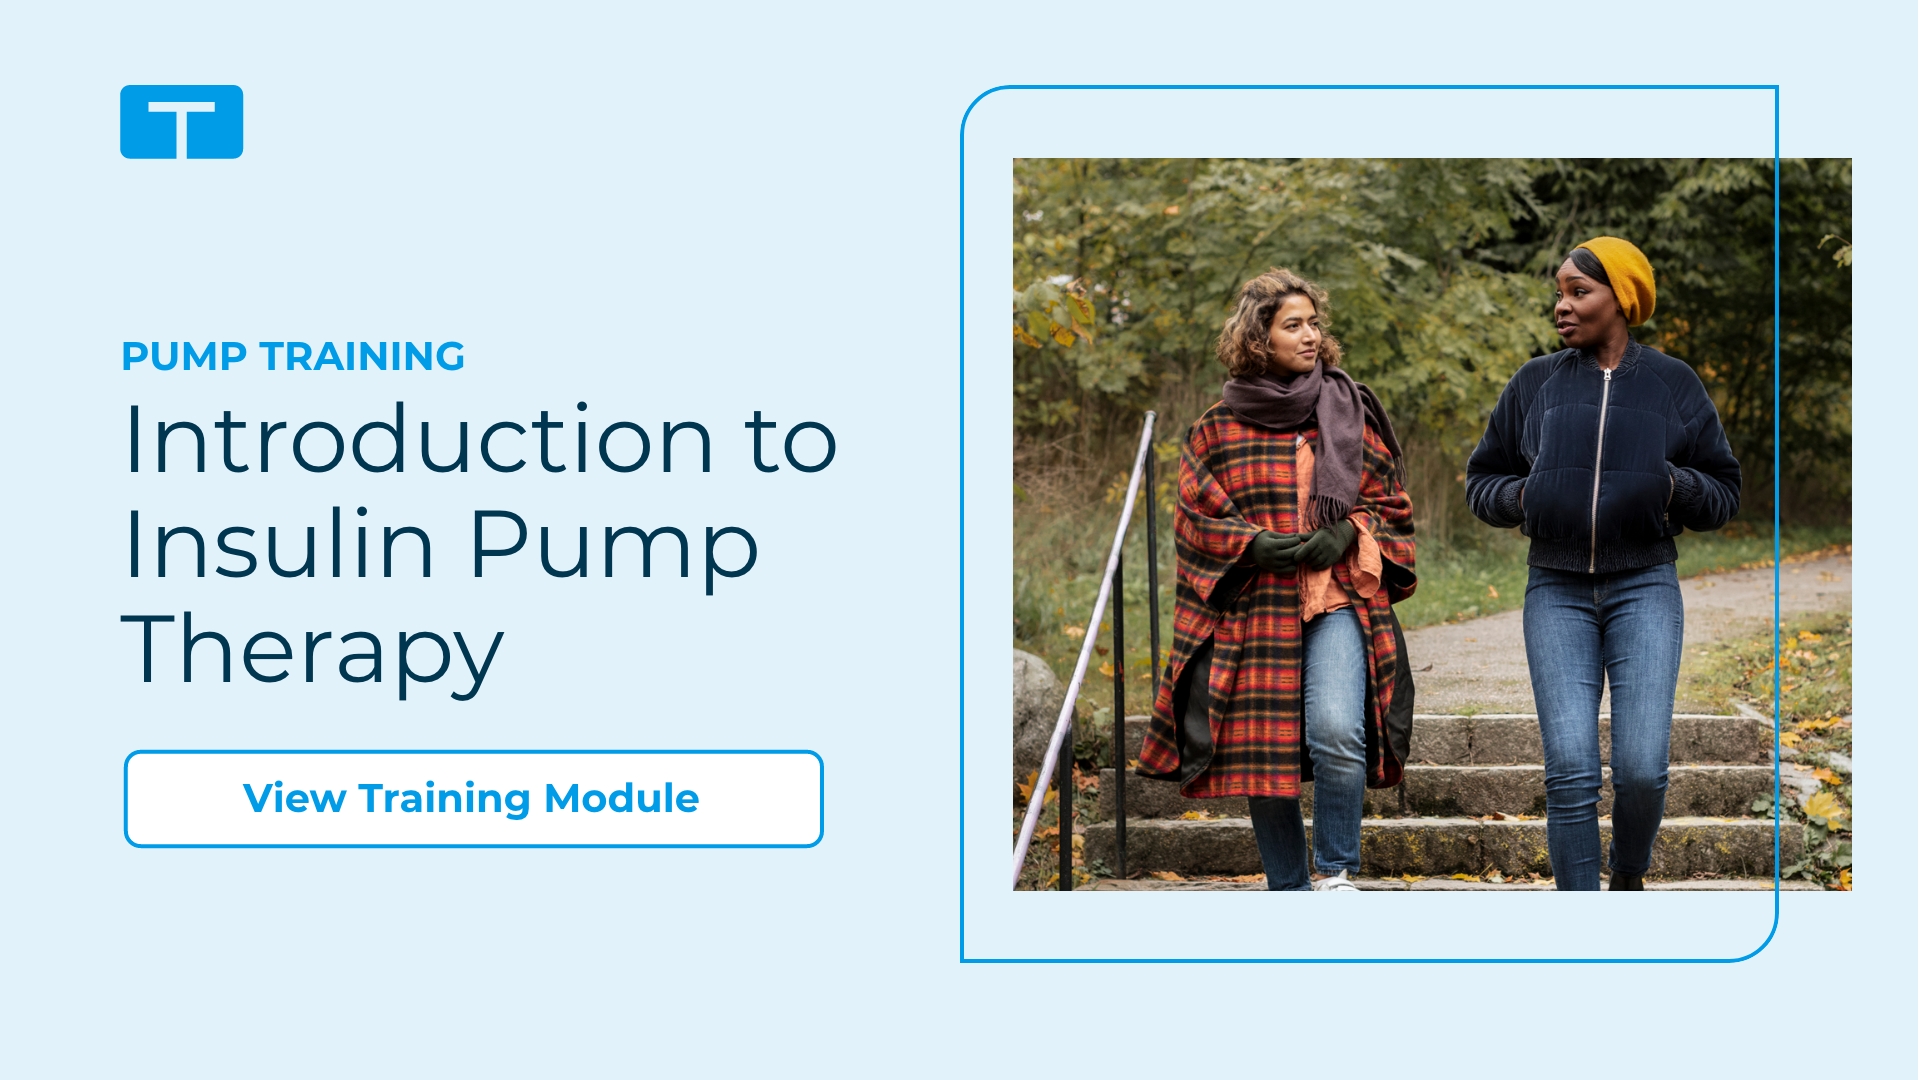 View introduction to Insulin Pump Therapy training module